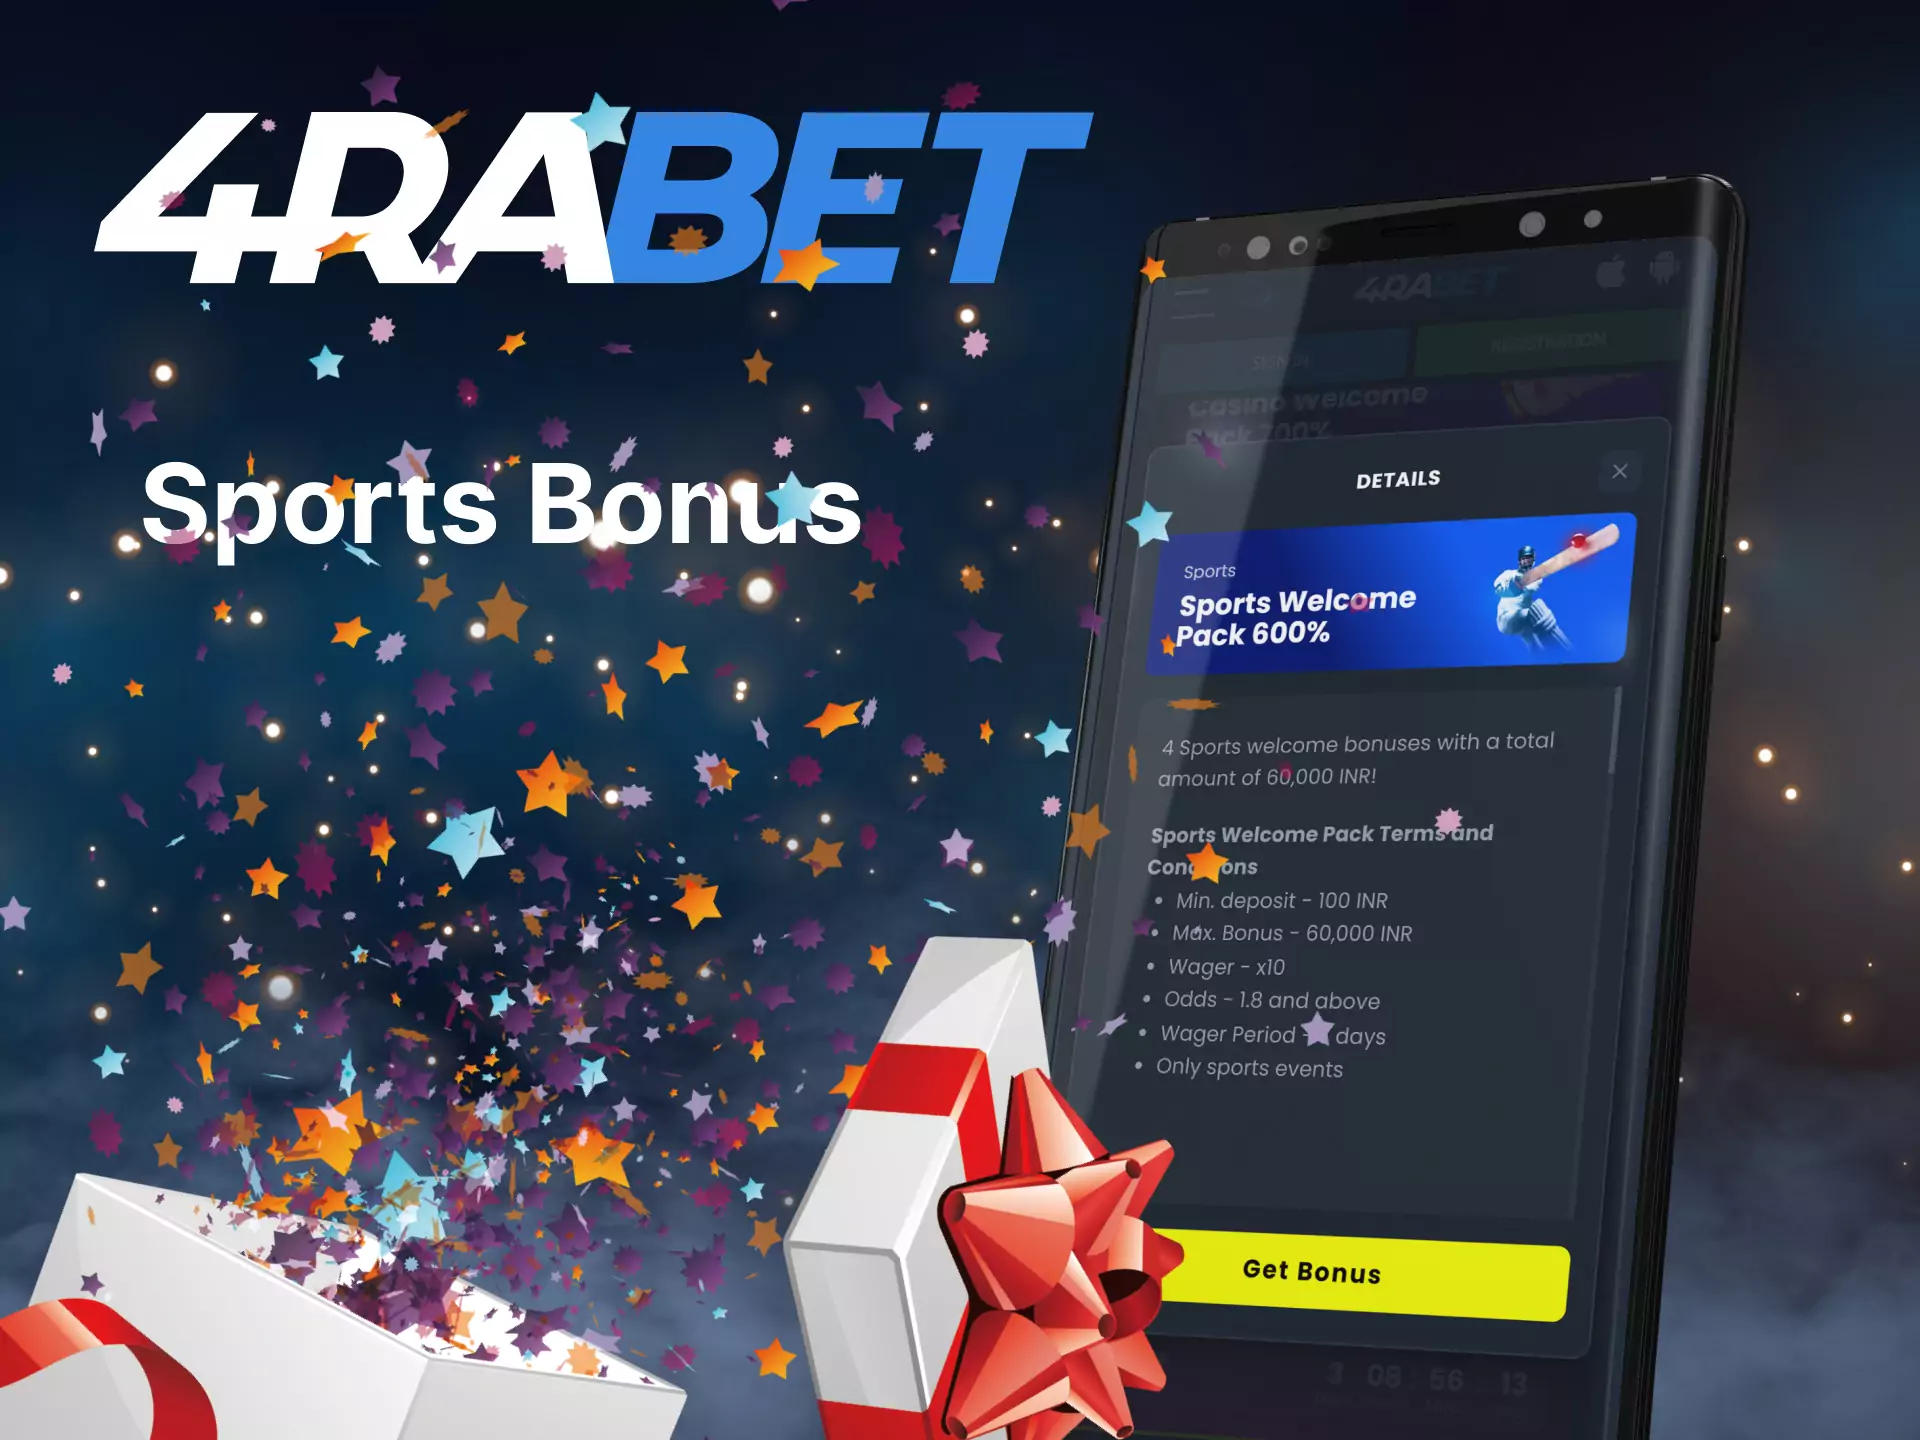 In the mobile app 4rabet get a special bonus for betting on sports.